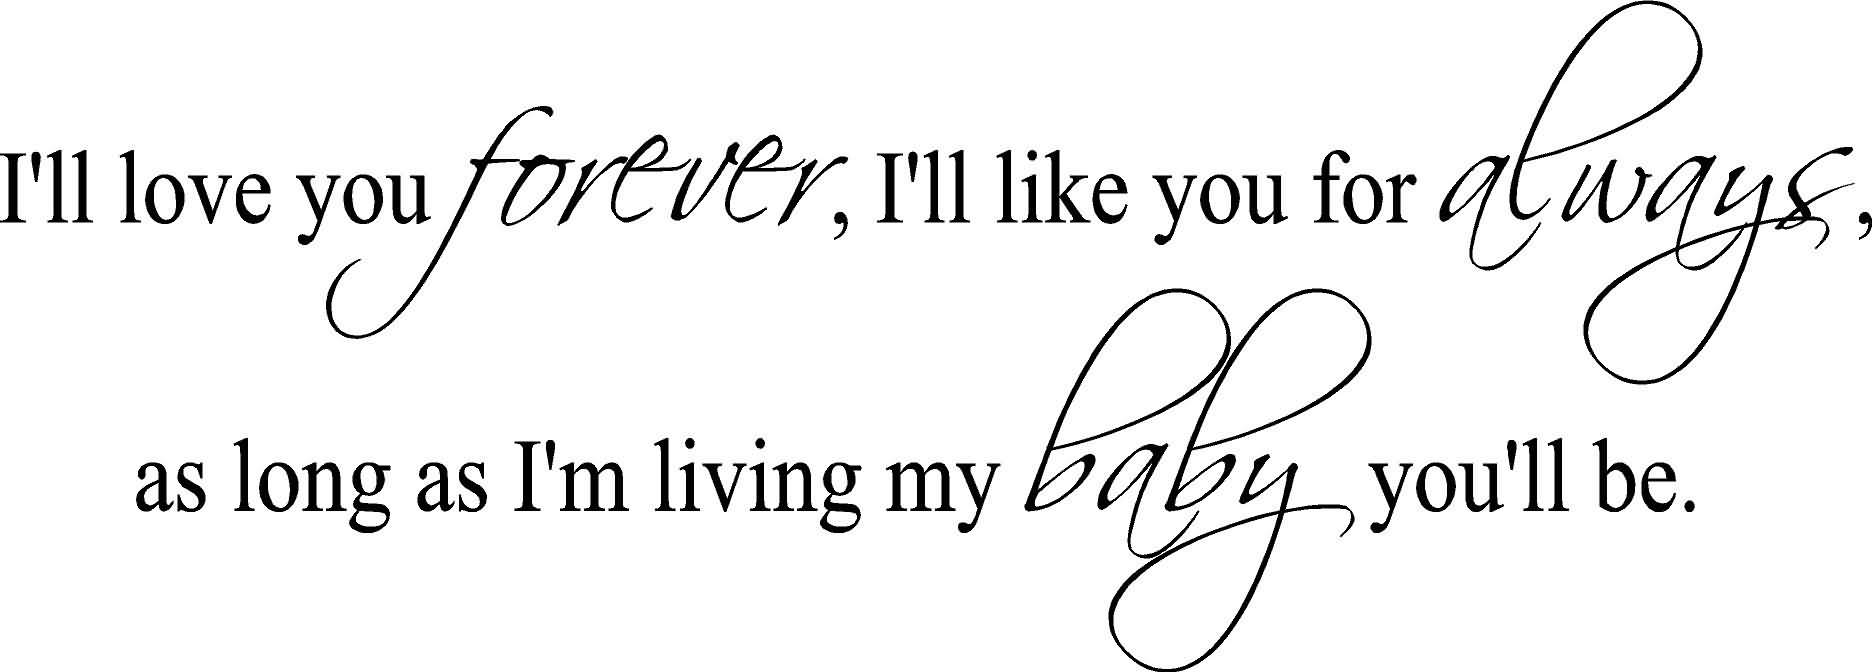 Ill Love You Forever Quote 20